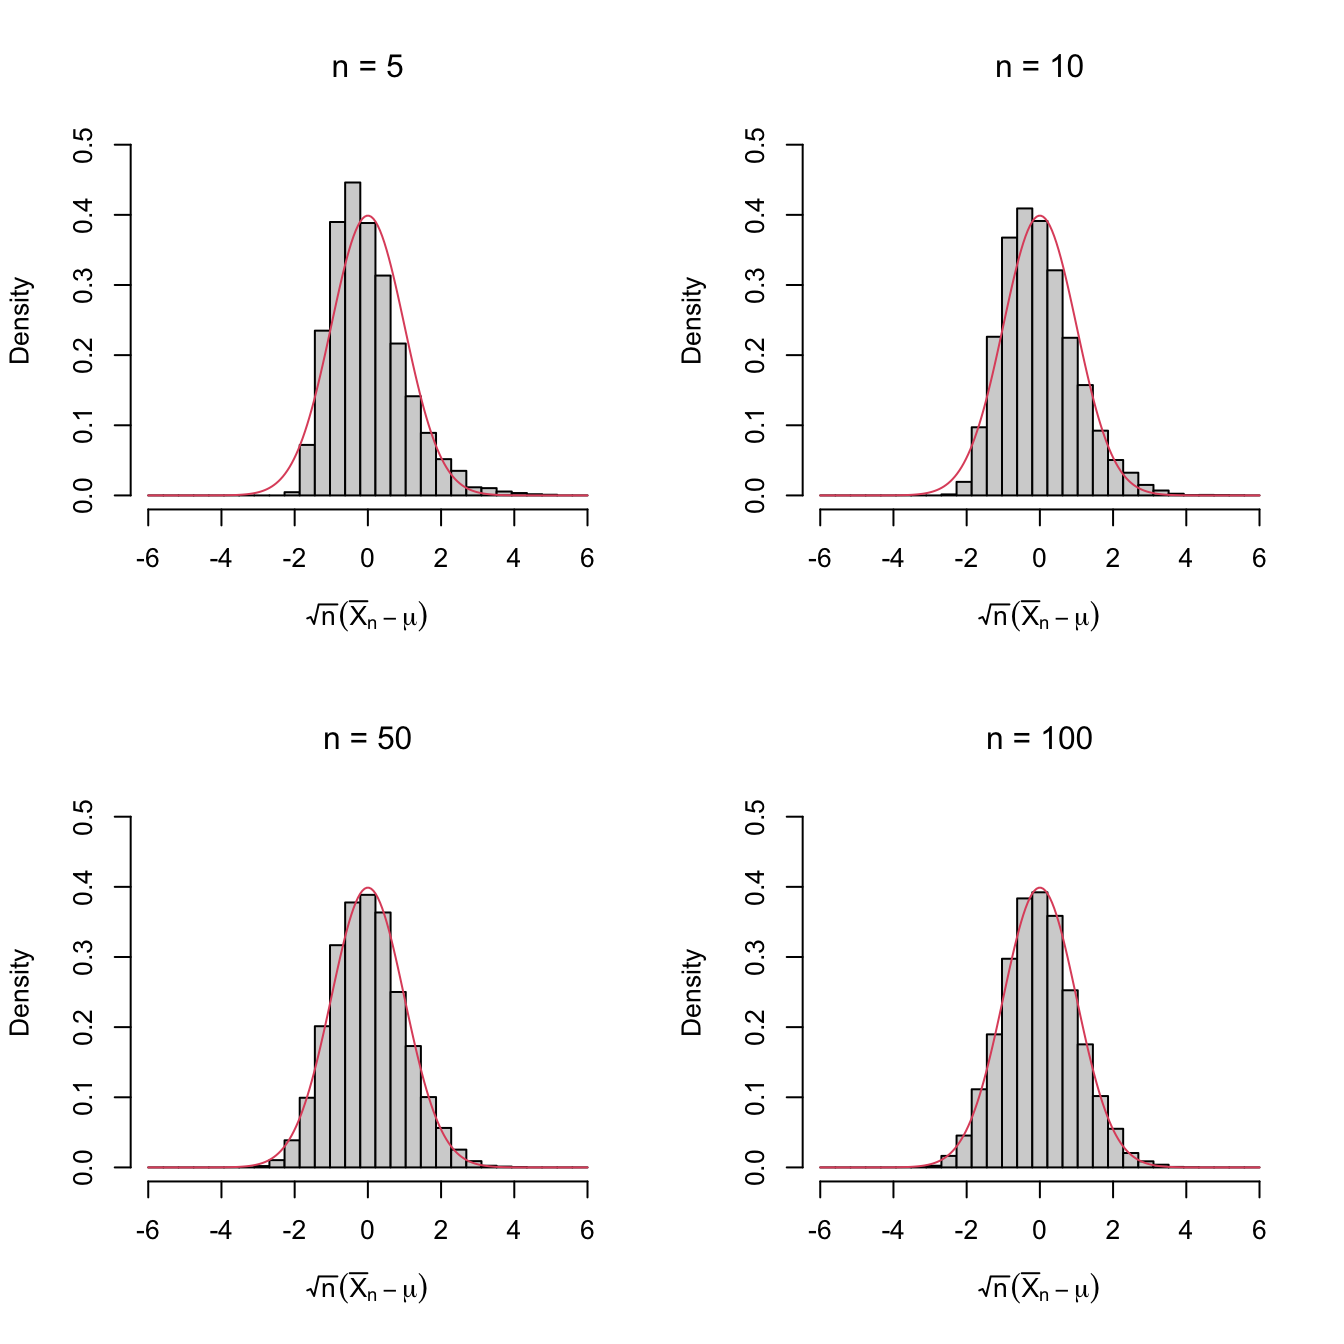 Histograms of \(\sqrt{n}(\bar{X}_n-\mu)\) for independent rv’s \(X_1,\ldots,X_n\) with expectation \(\mu\) and variance \(\sigma^2.\) The pdf of \(\mathcal{N}(0,\sigma^2)\) is superimposed in red. A clear convergence appears, despite \(X_1,\ldots,X_n\sim\mathrm{Exp}(1)\) being heavily non-normal. The culprit is the Central Limit Theorem.